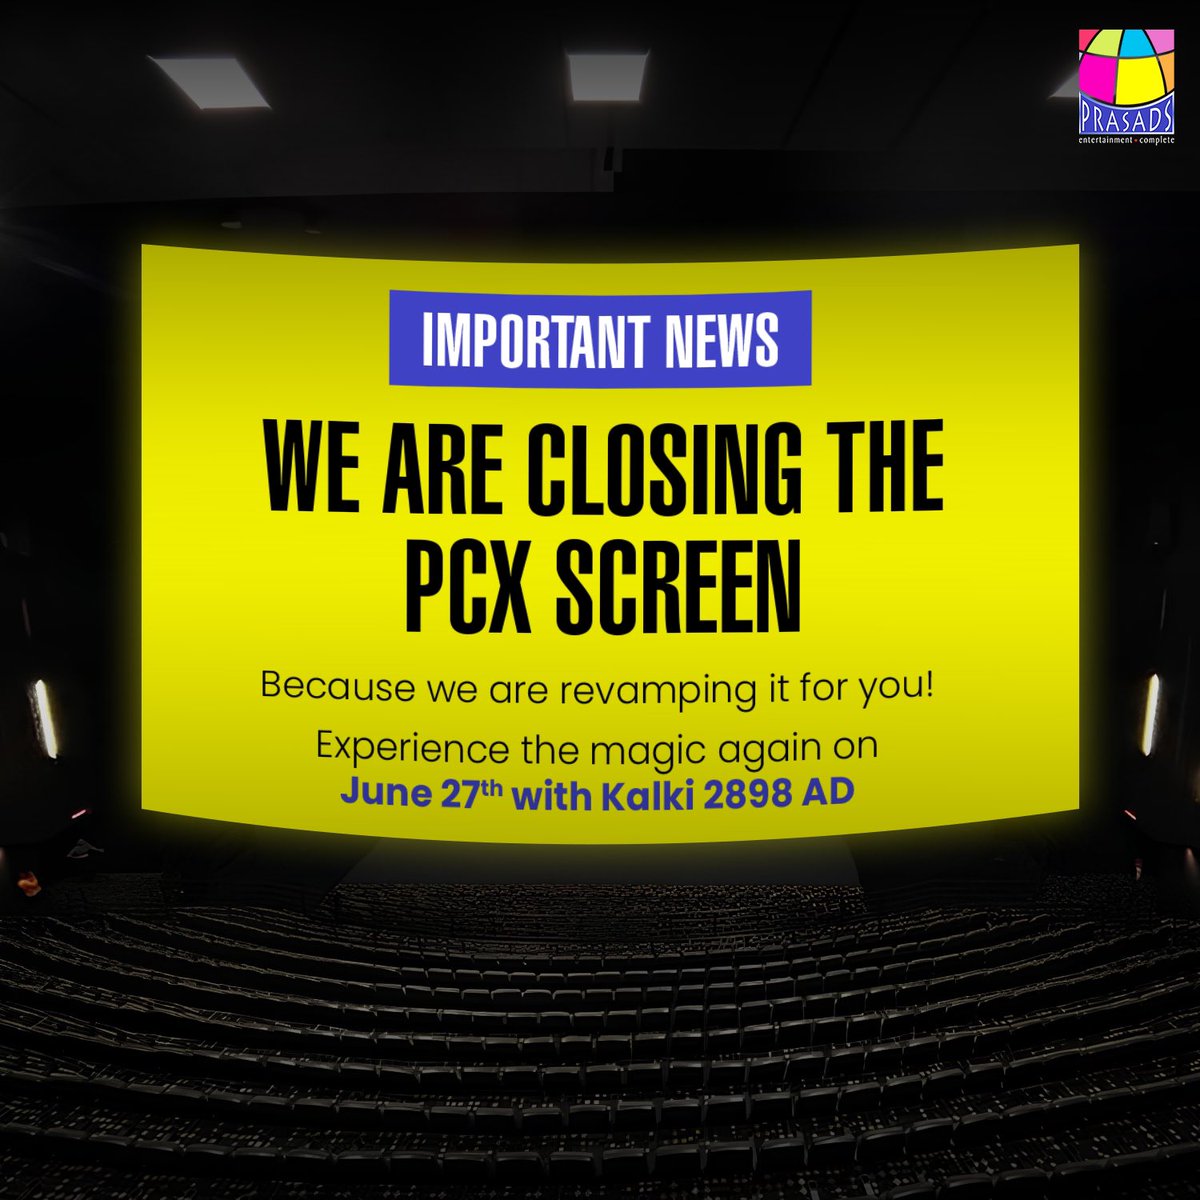 UPDATE: The #PCX screen at #PrasadsMultiplex is temporarily closed from 3rd June, as we set up new seating for your comfort and a better viewing experience. The PCX screen will reopen on June 27 for the biggest release of #Kalki2898AD🍿🎬